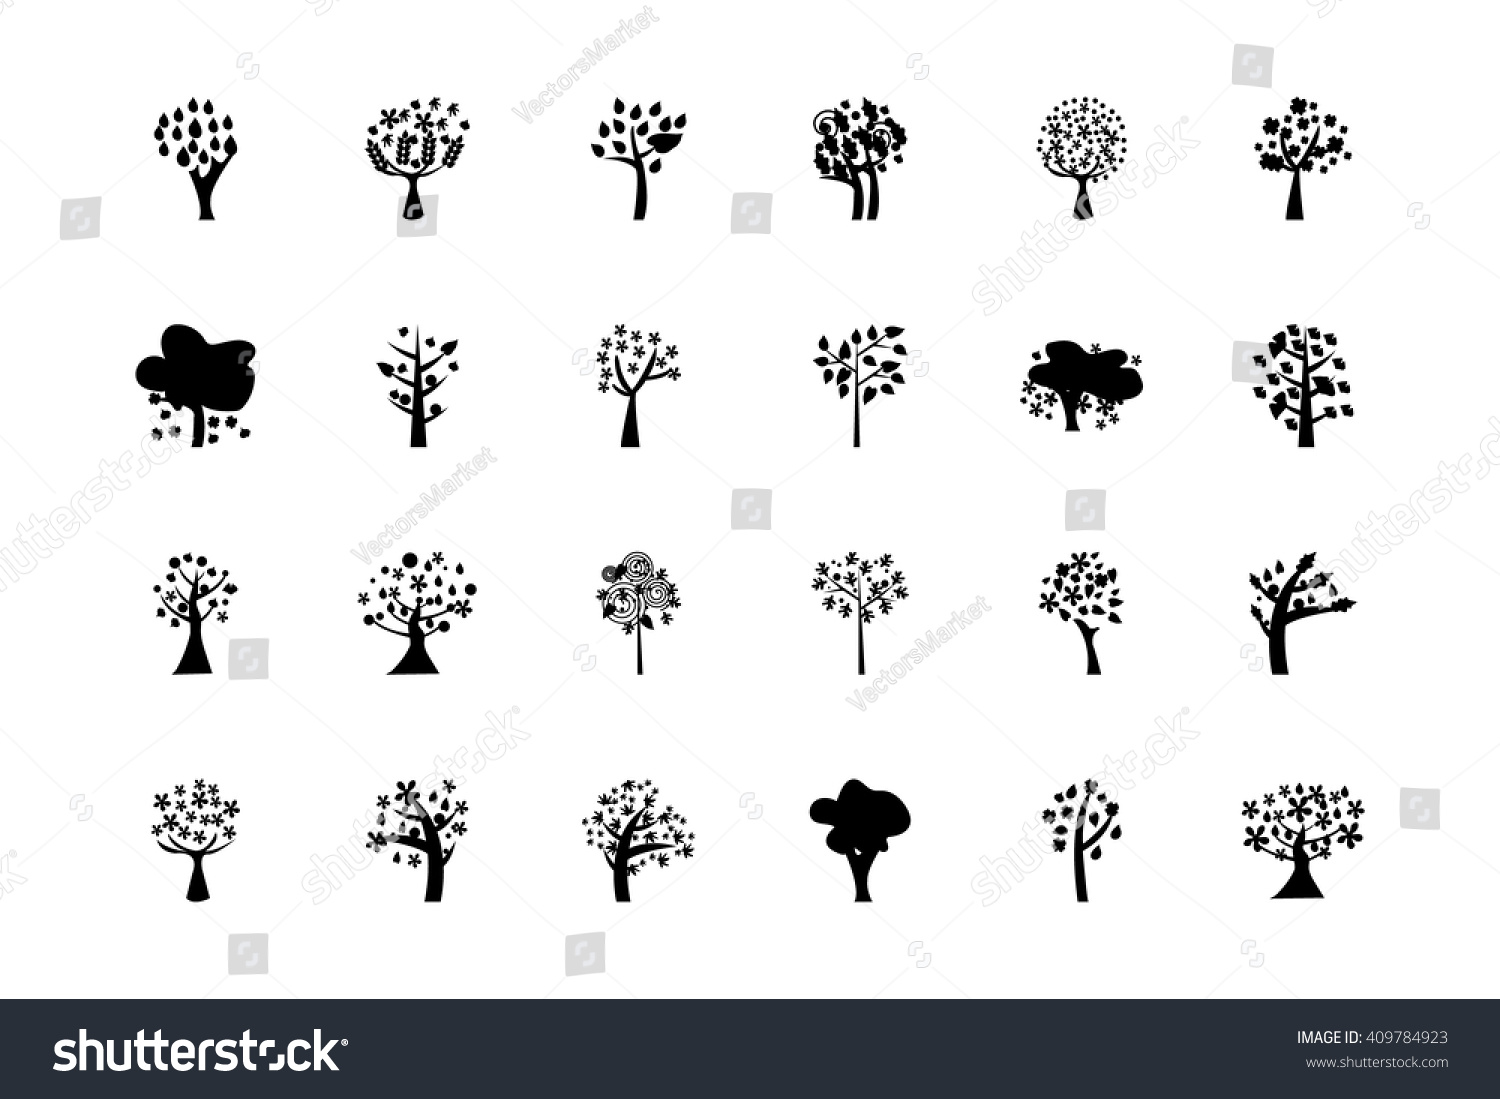 SVG of Trees Vector Icons 5 svg